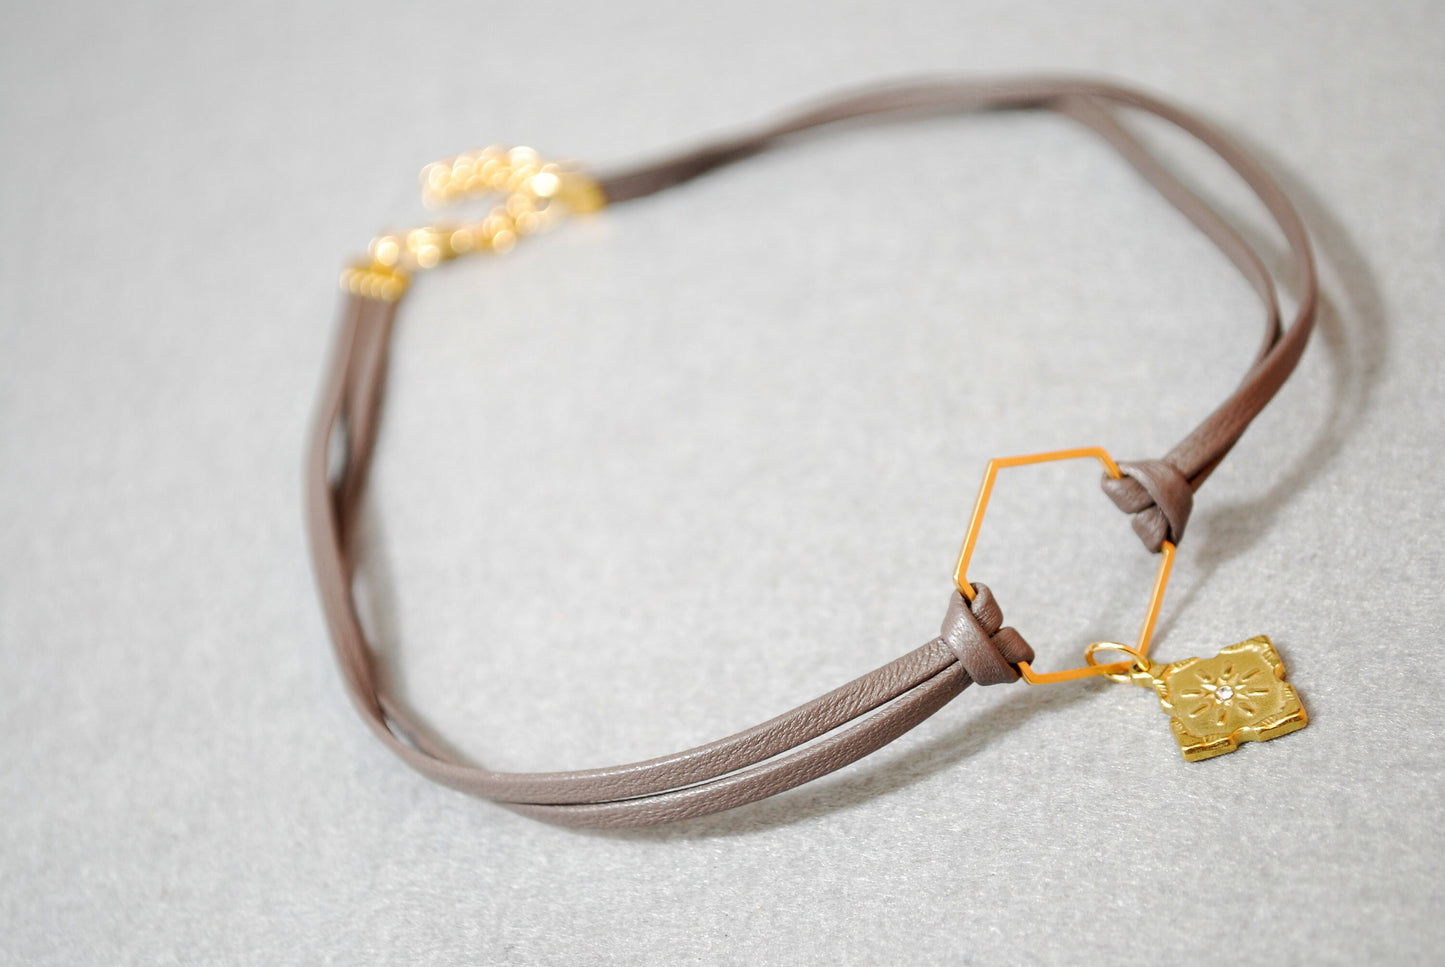 Boho-Chic Brown Leather Choker with Hexagon Stainless Steel Accent. 13" + adjustible chain